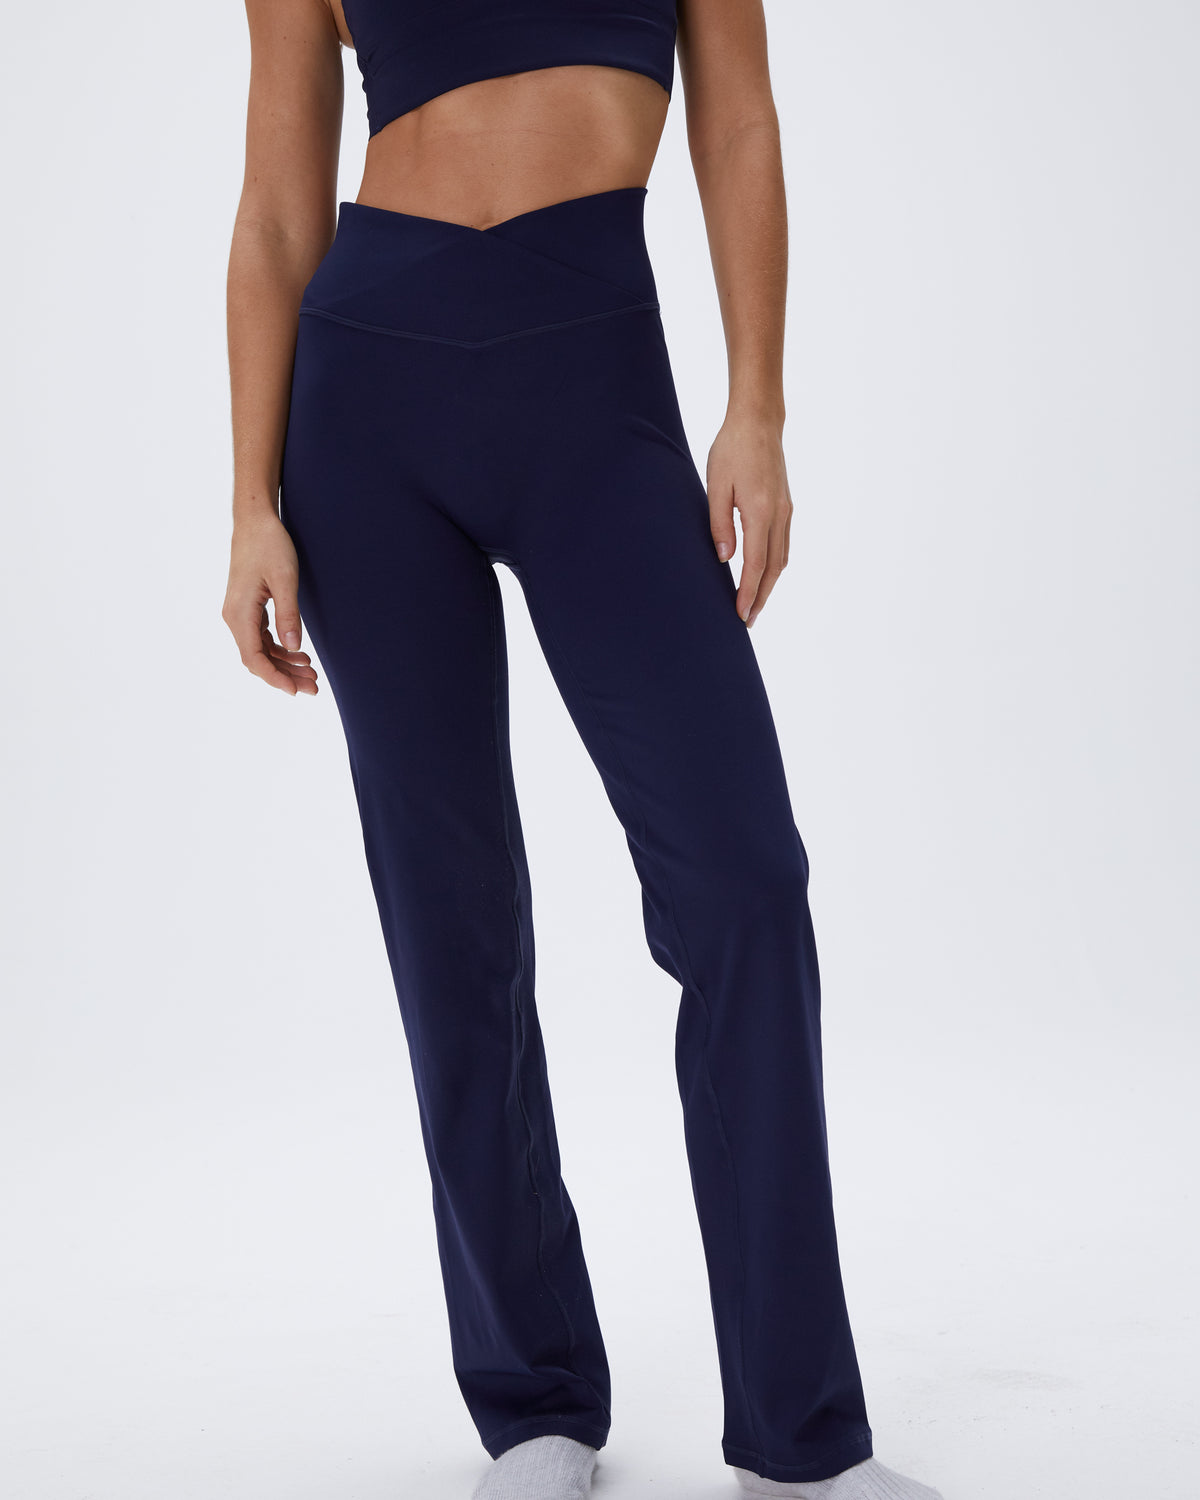 Women's Navy Blue Ultimate Wrap Over Yoga Pant